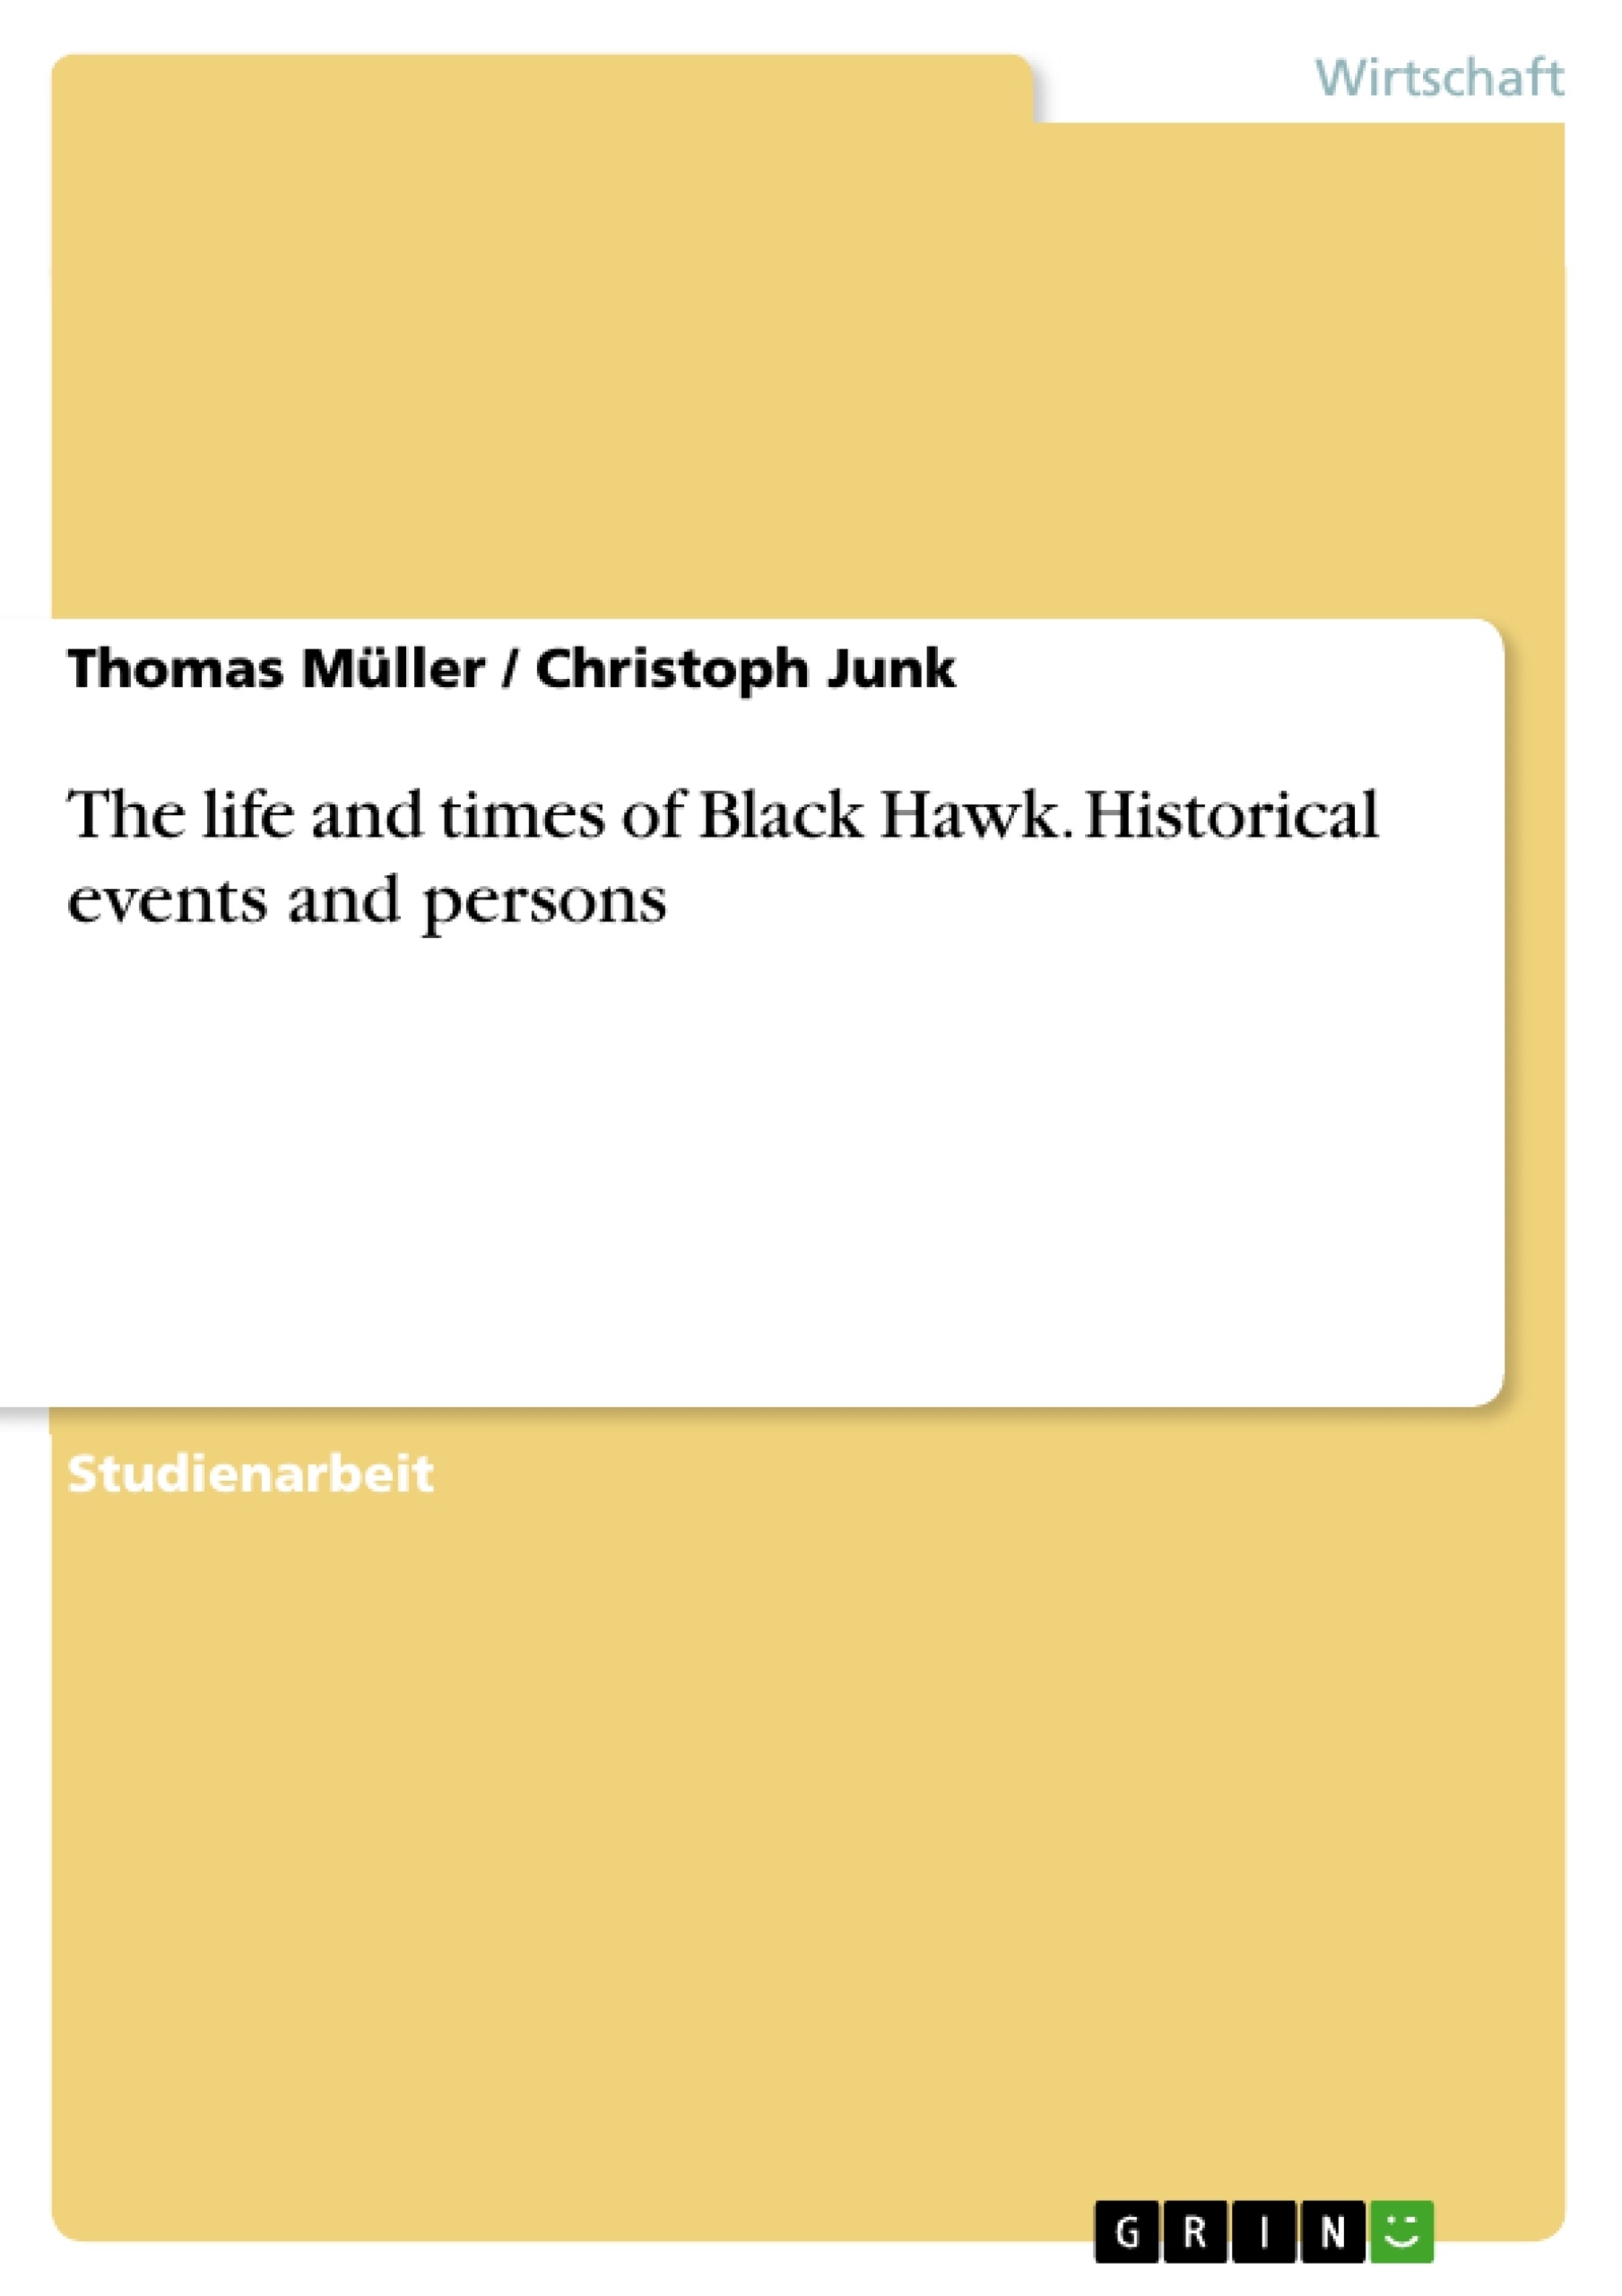 Título: The life and times of Black Hawk. Historical events and persons